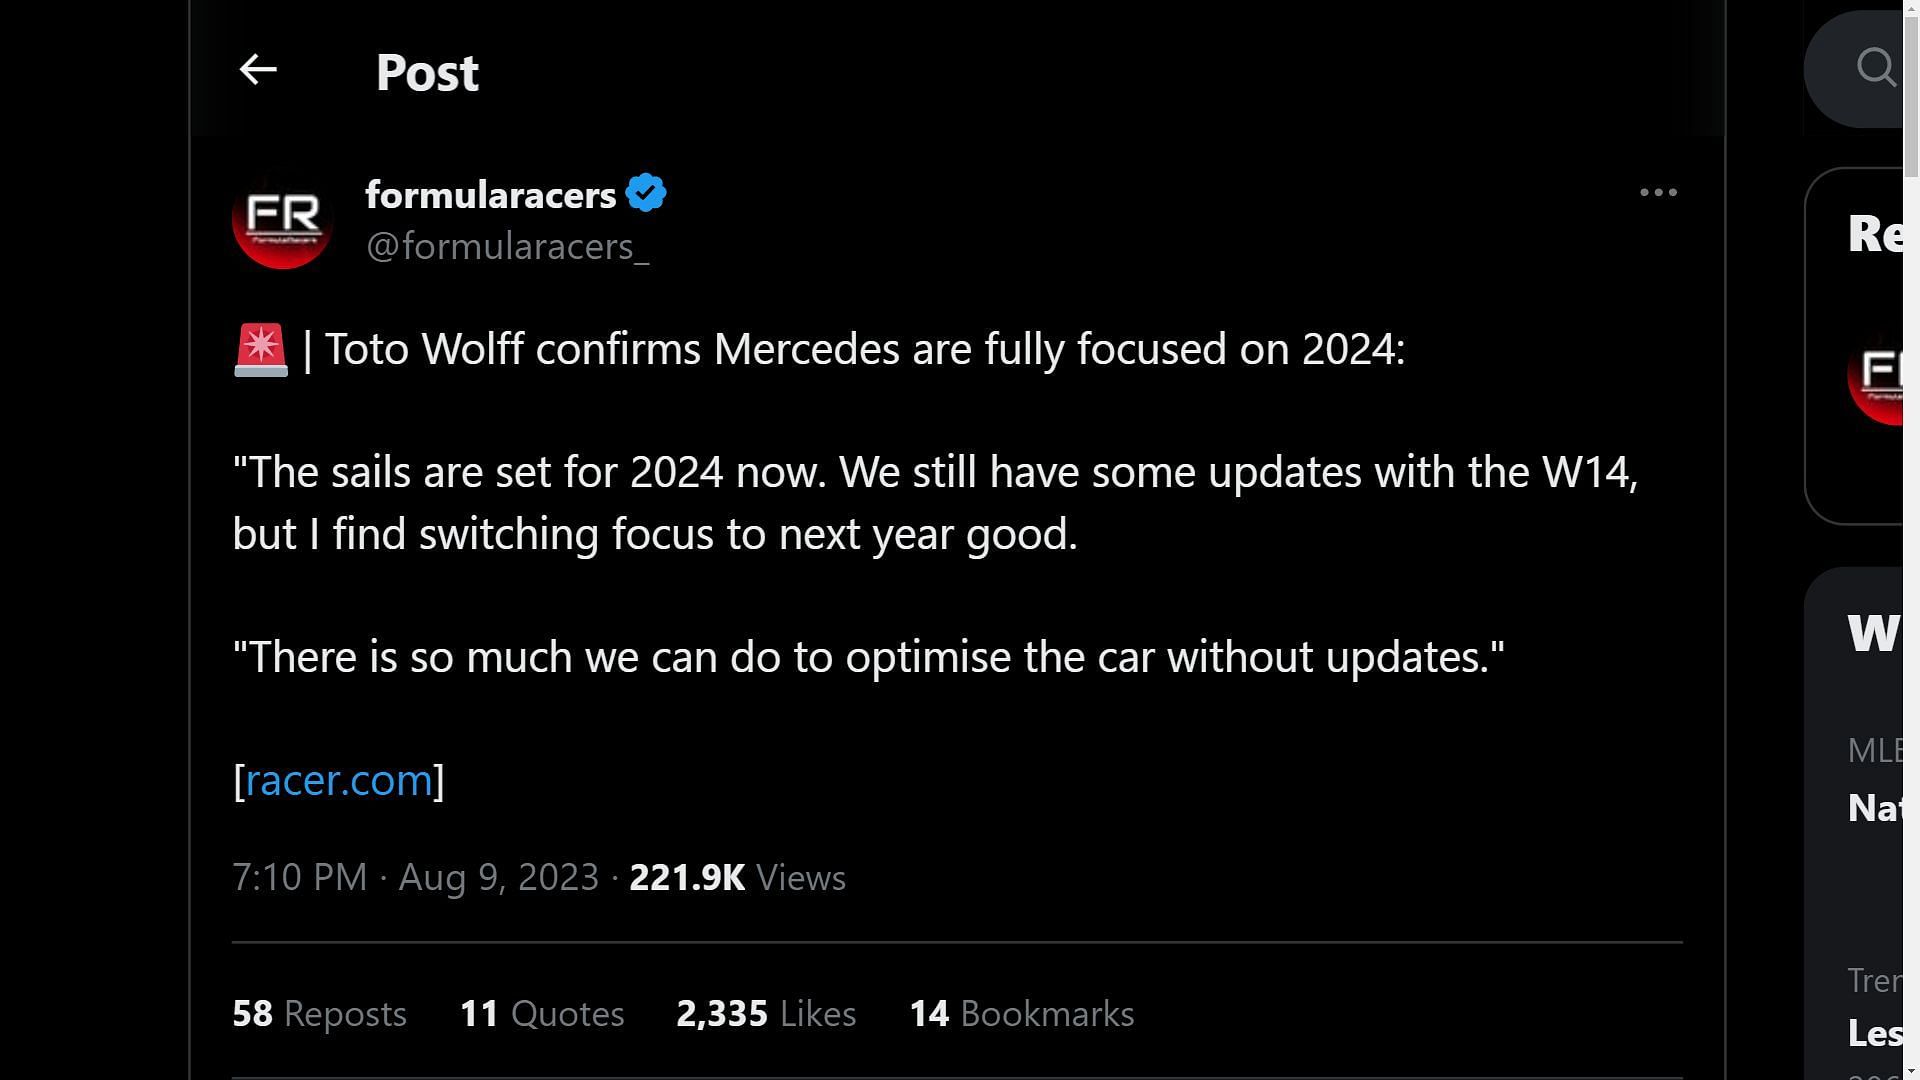 Tweet about Toto Wolff&#039;s comments about focusing on 2024 F1 season (Image via Sportskeeda)